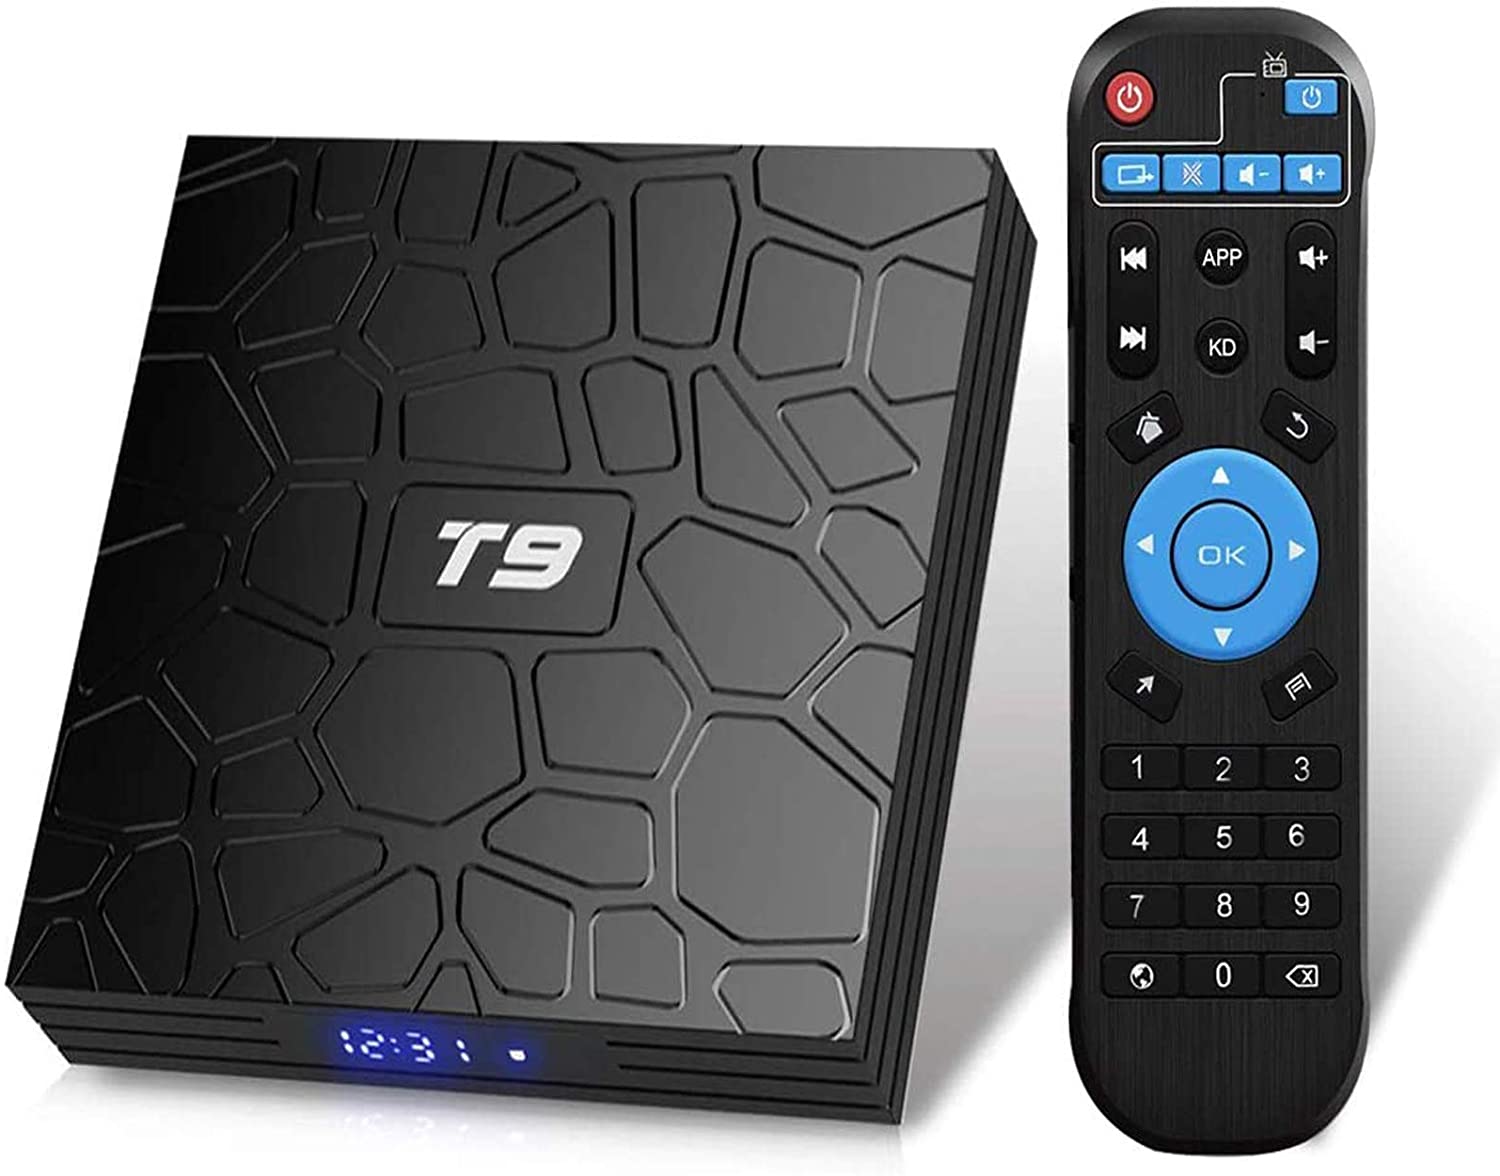 EASYTONE Android TV Box 10.0 4GB RAM 64GB ROM H616 Quad-Core CPU Smart TV  Box Supports 4K 6K TV Box with H.265 Decoding